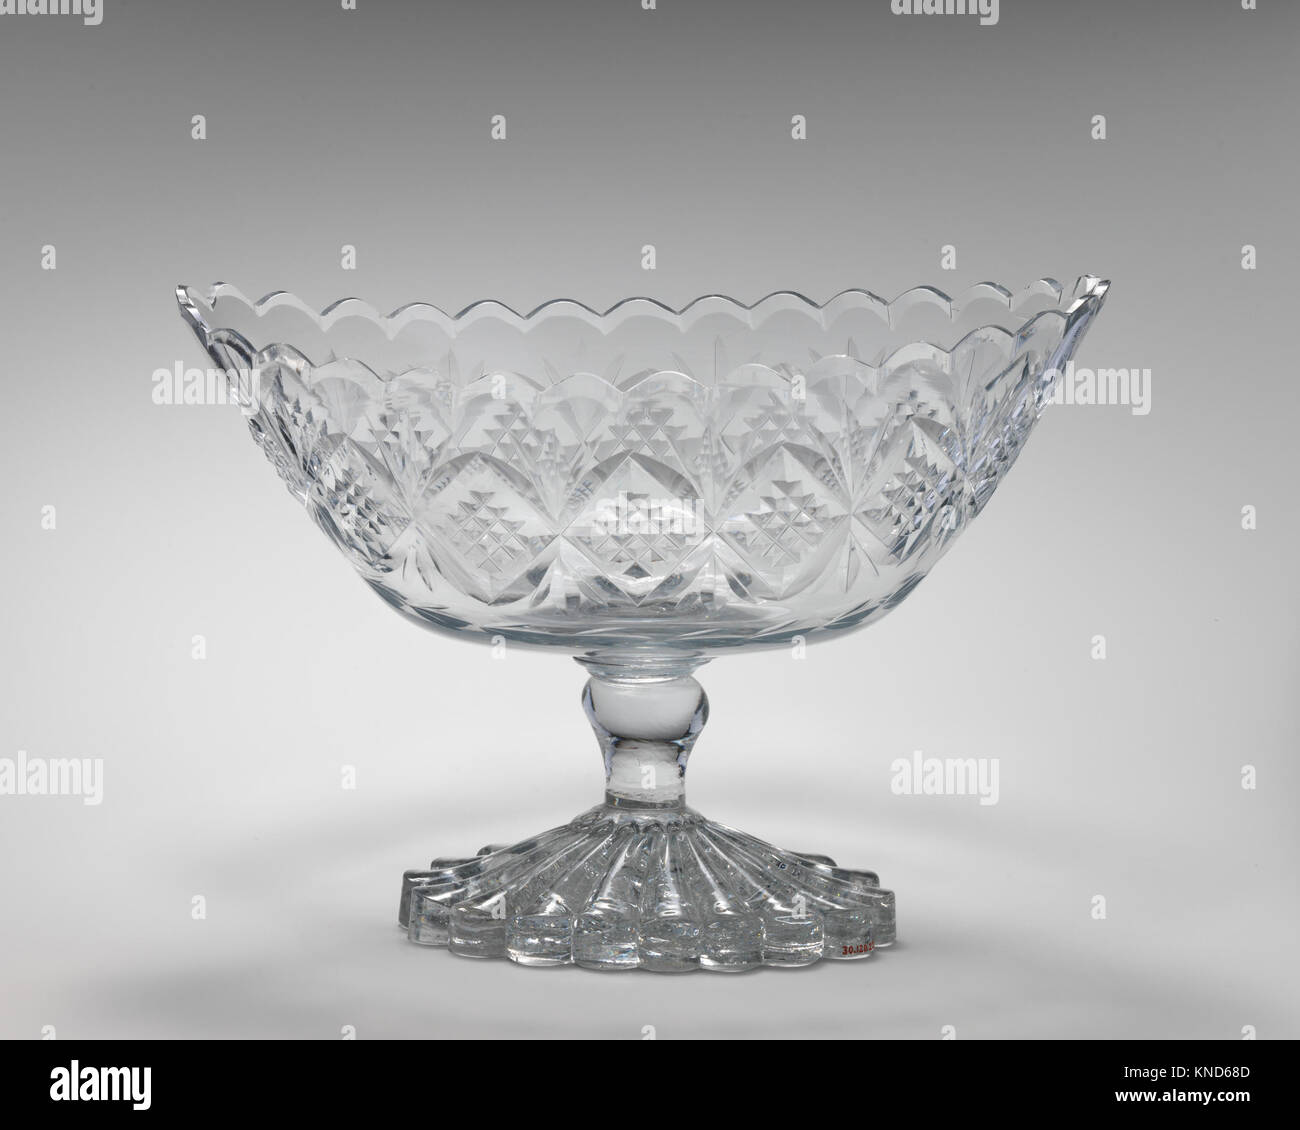 Fruit bowl MET DP-1618-025 196637 probably Irish, Fruit bowl, early 19th century, Glass, H. 8 3/4 in.  (22.2 cm); L. 12 1/2 in. (31.8 cm.). The Metropolitan Museum of Art, New York. The Sylmaris Collection, Gift of George Coe Graves, 1930 (30.120.222) Stock Photo